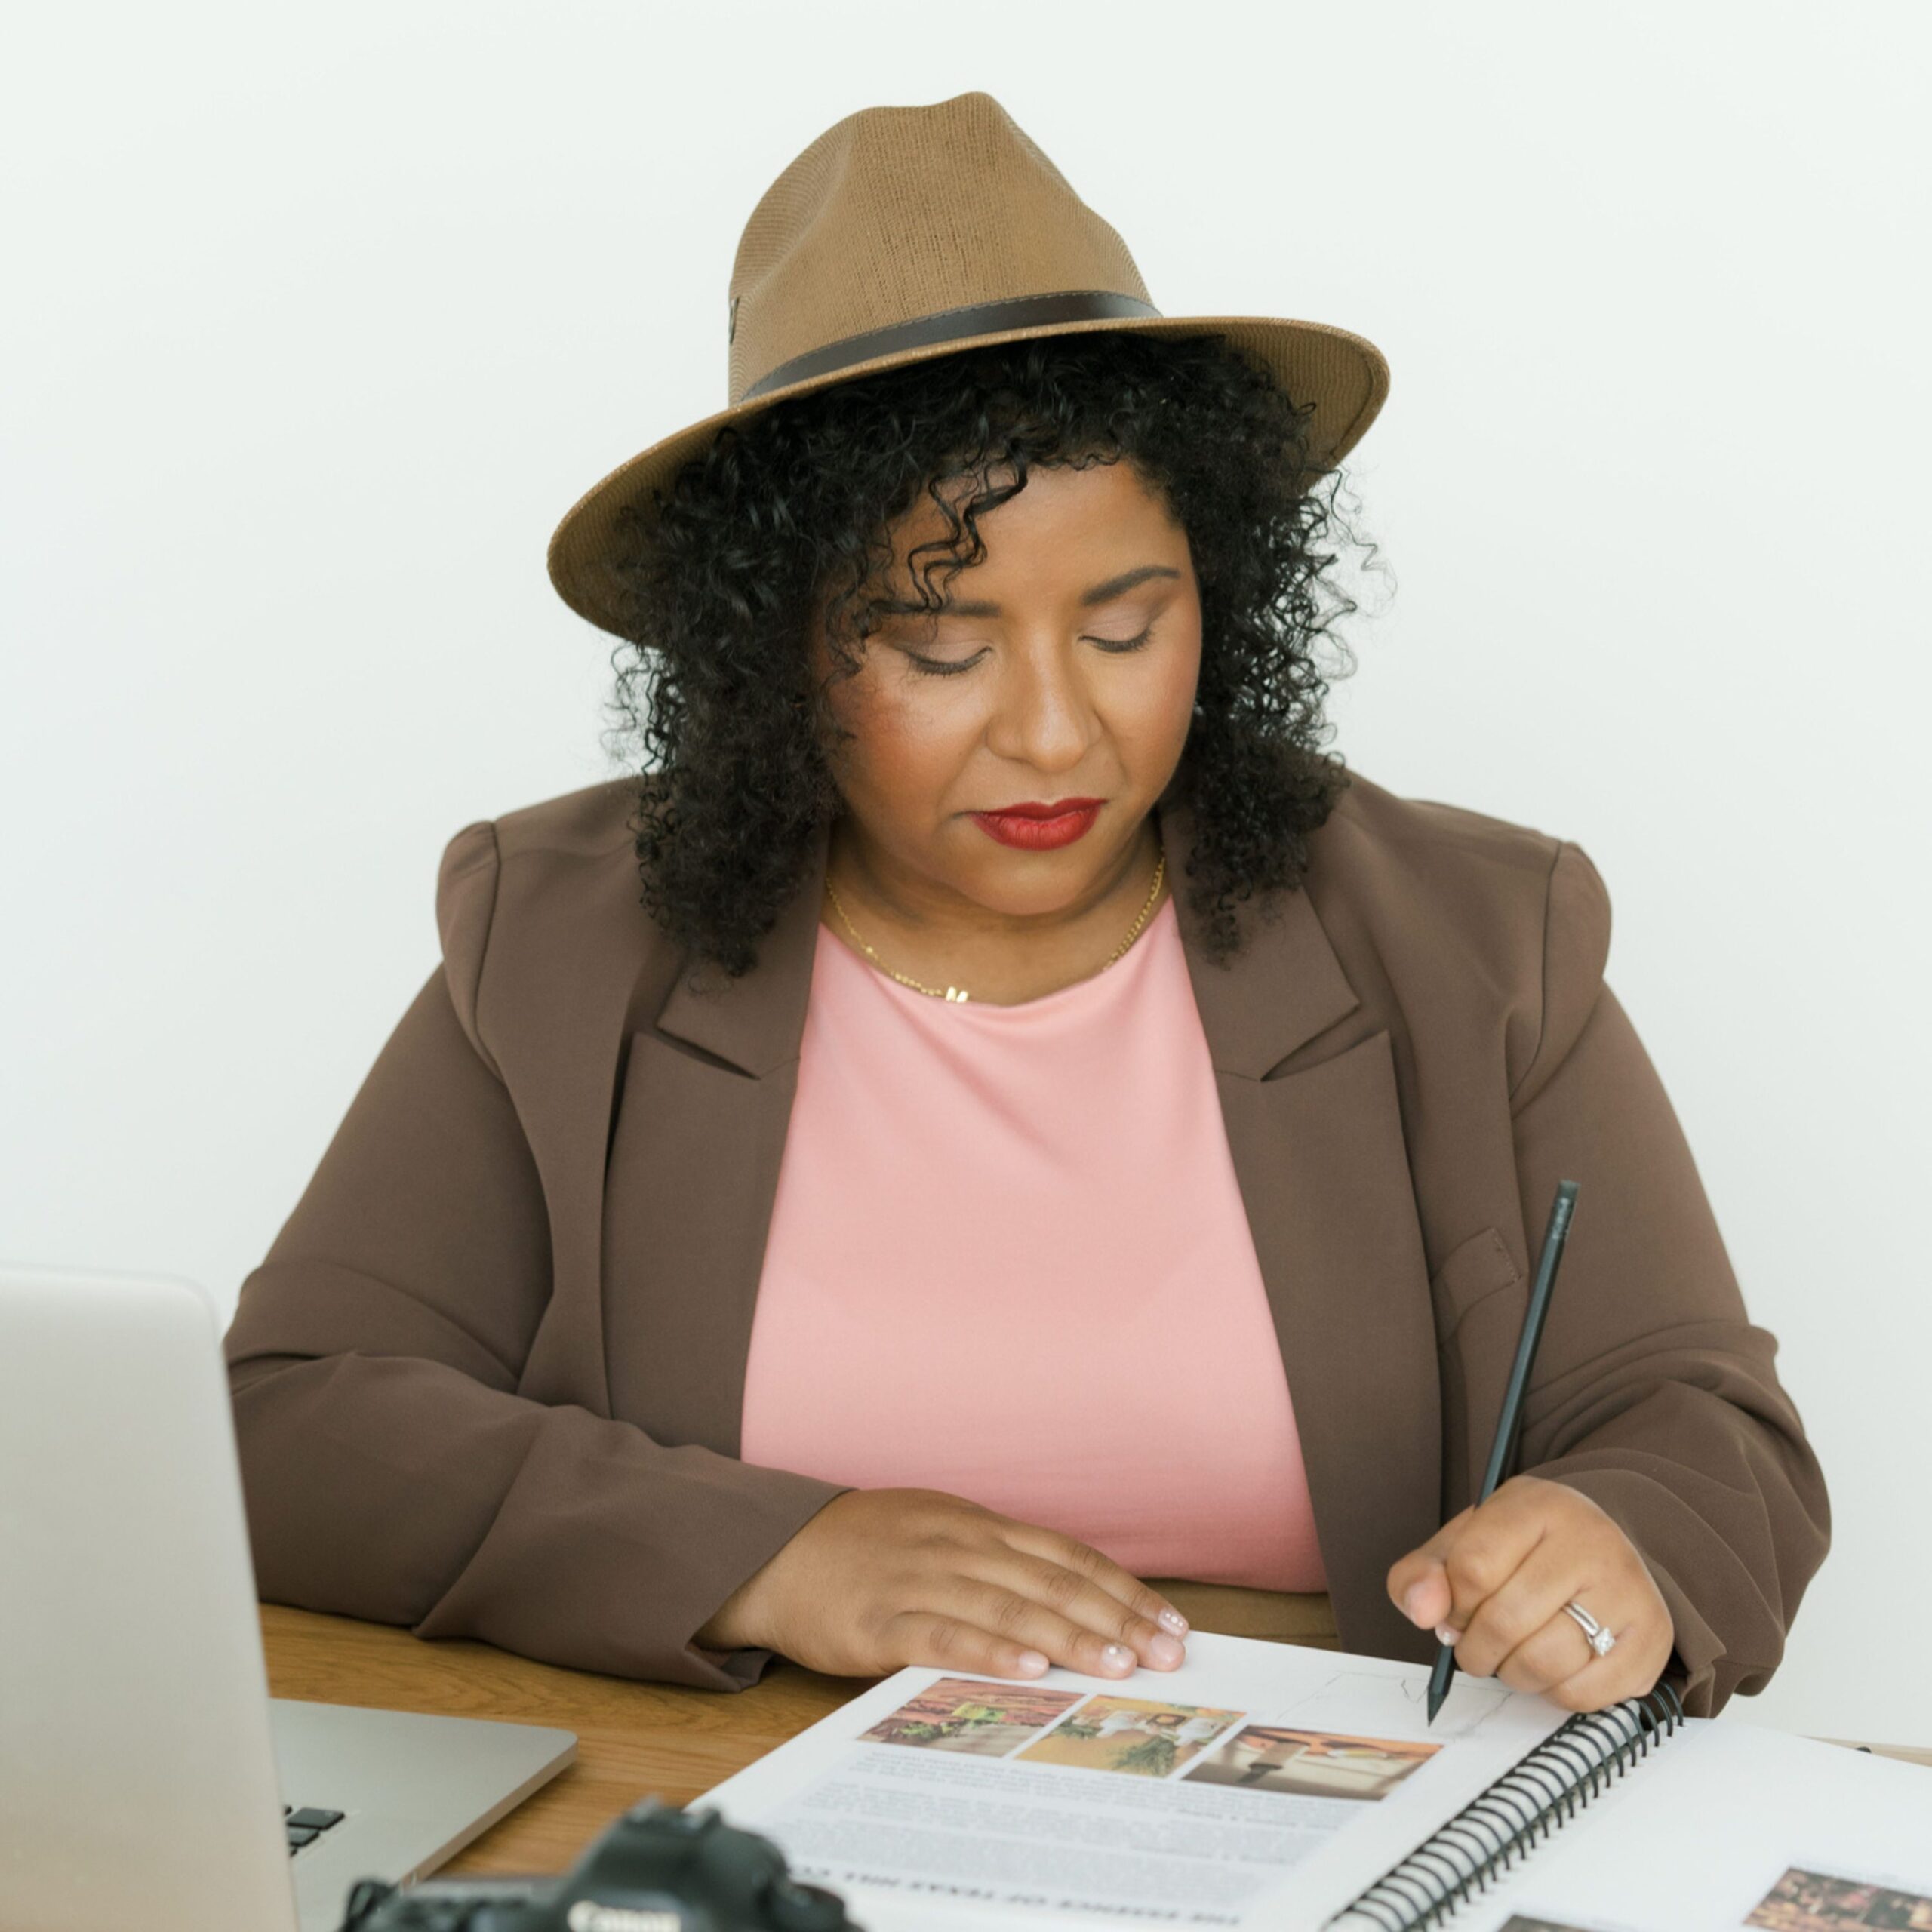 Woman in a brown blazer and hat writing in a notebook at a desk with a laptop and camera.